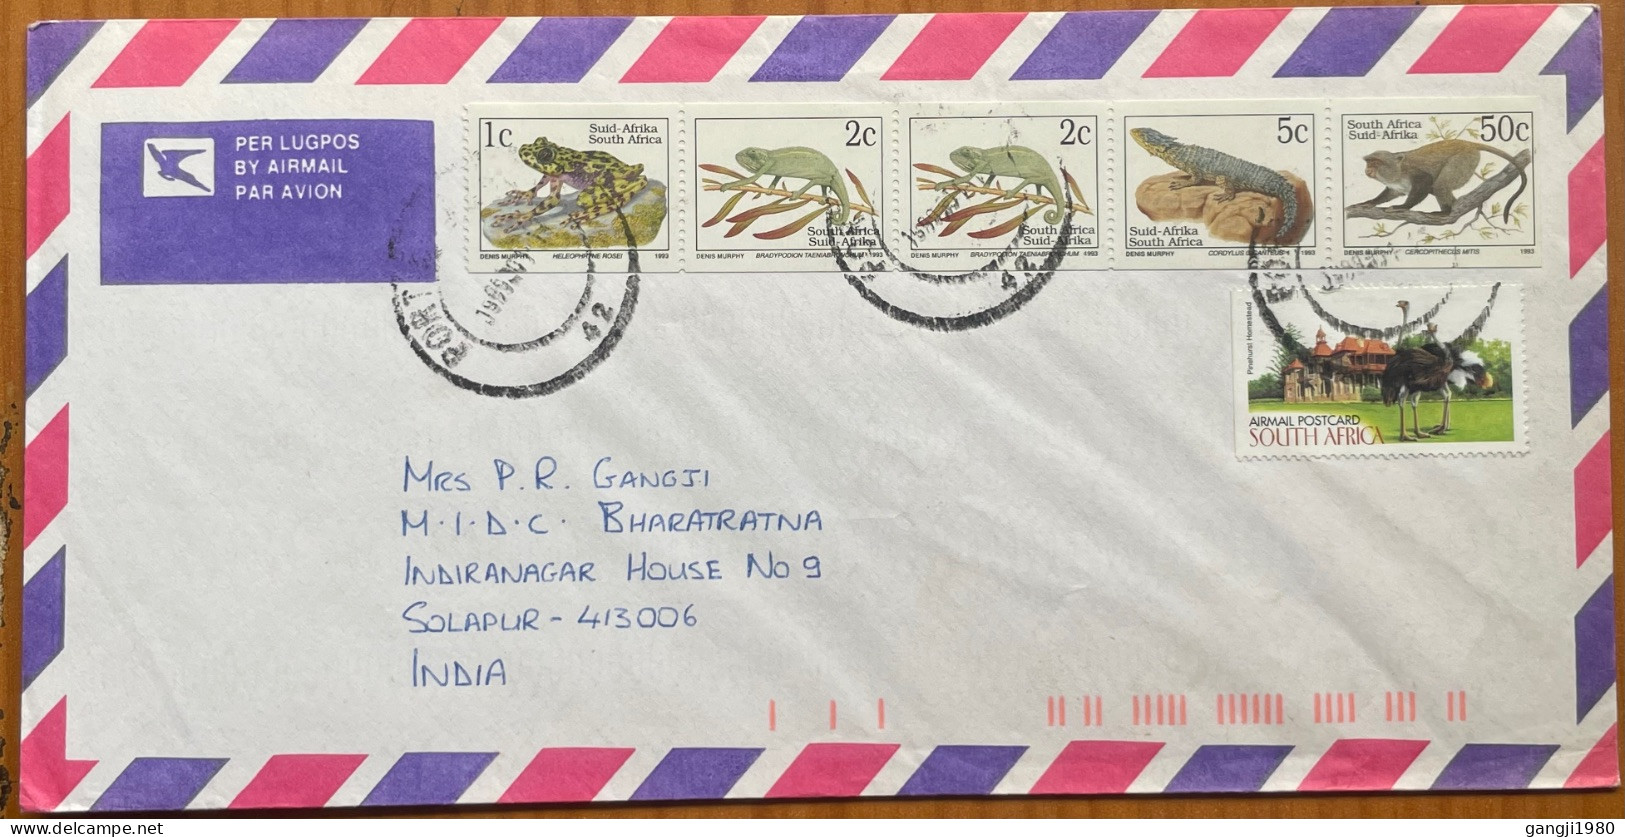 SOUTH AFRICA 1993, COVER USED TO INDIA, BOOKLET PANE, REPTILE, MONKEY, ANIMAL, BIRD, BUILDING, 6 STAMP, PORT ELIZABETH - Briefe U. Dokumente